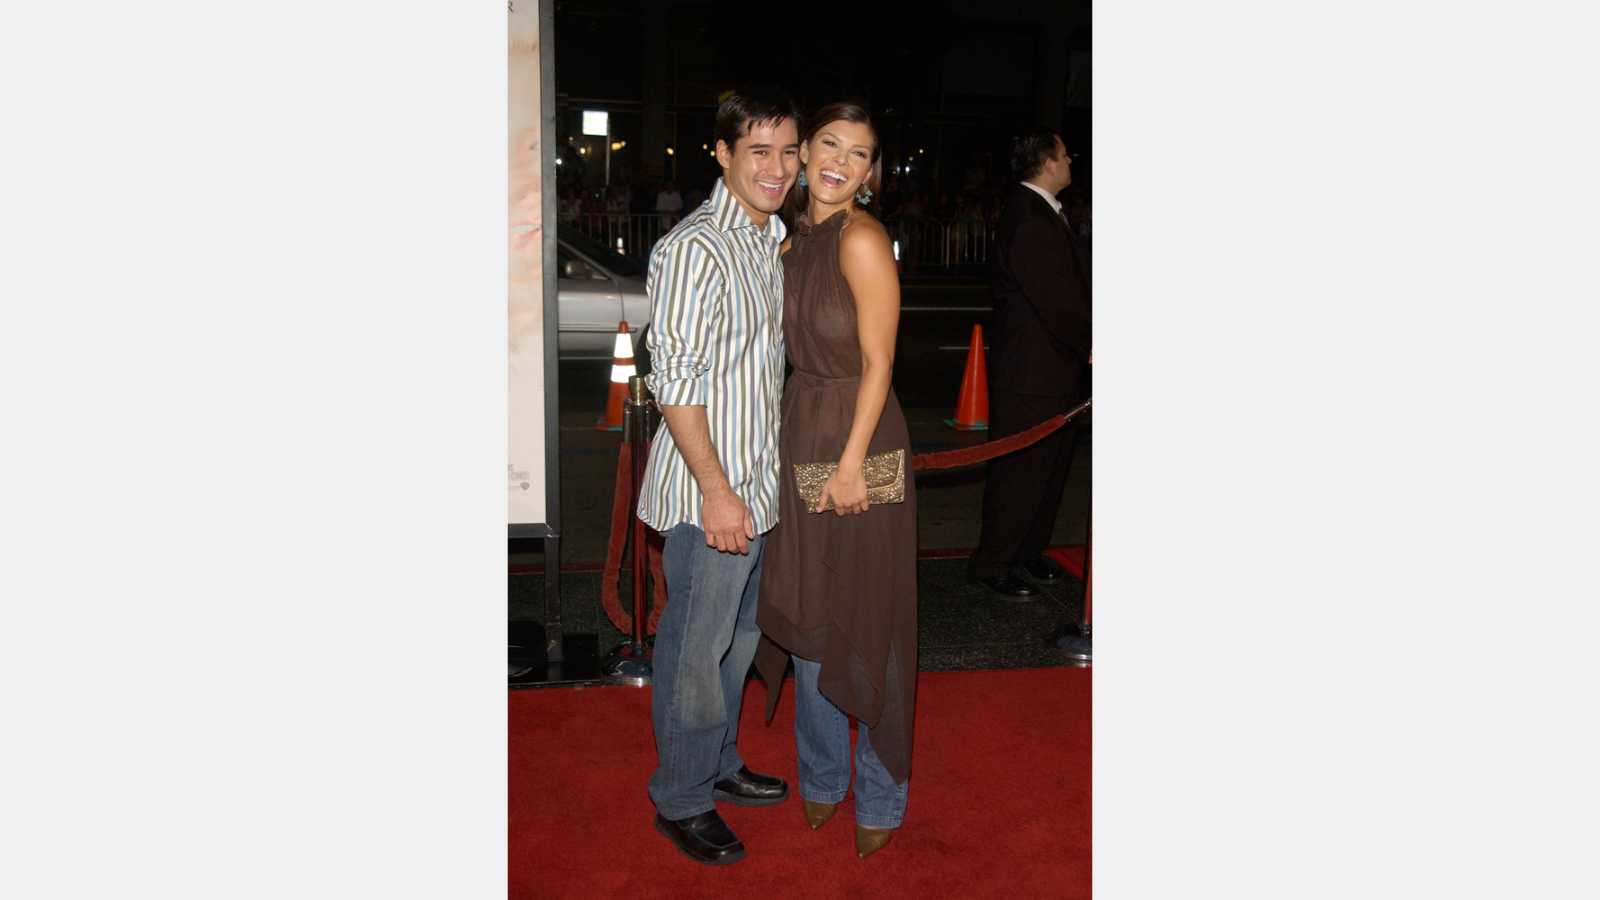 Actor MARIO LOPEZ & actress girlfriend ALI LANDRY at the Los Angeles premiere of White Oleander. 08OCT2002. Paul Smith / Featureflash